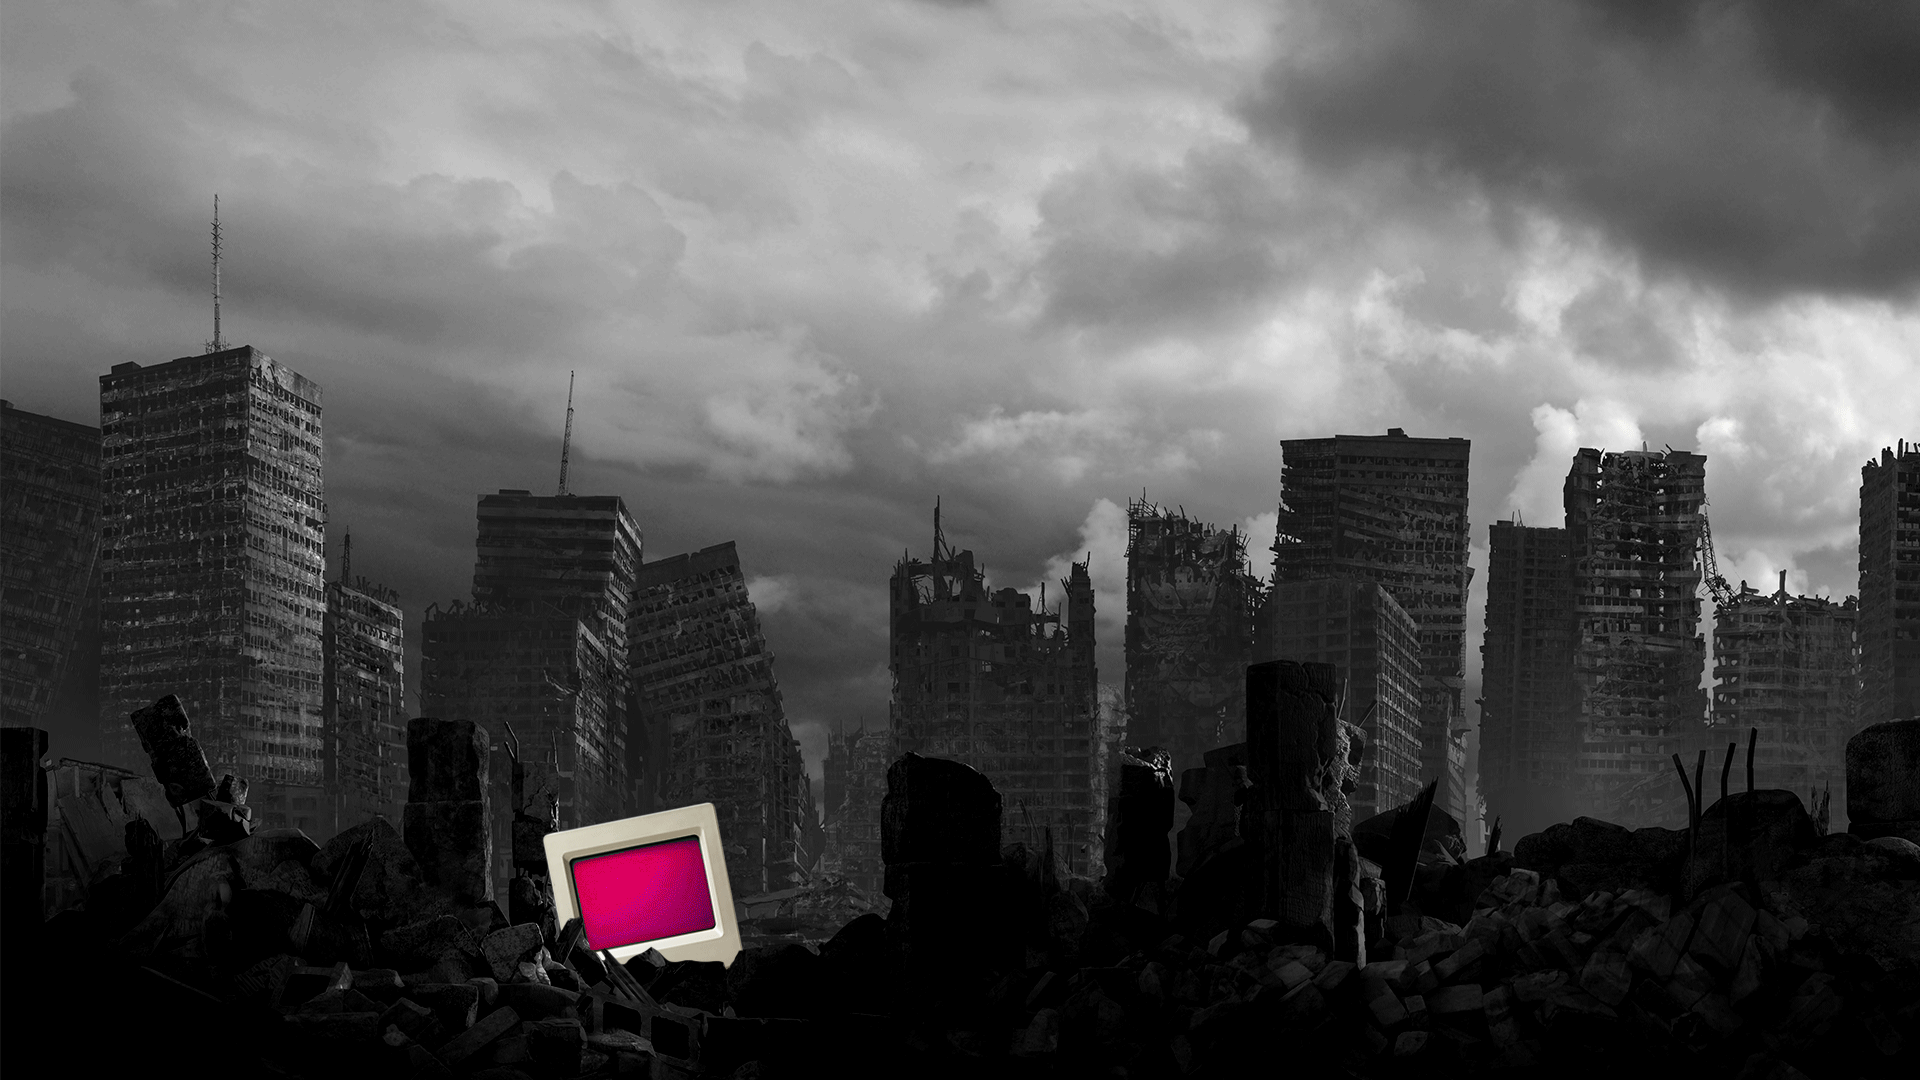 Illustration of a computer in an urban wasteland